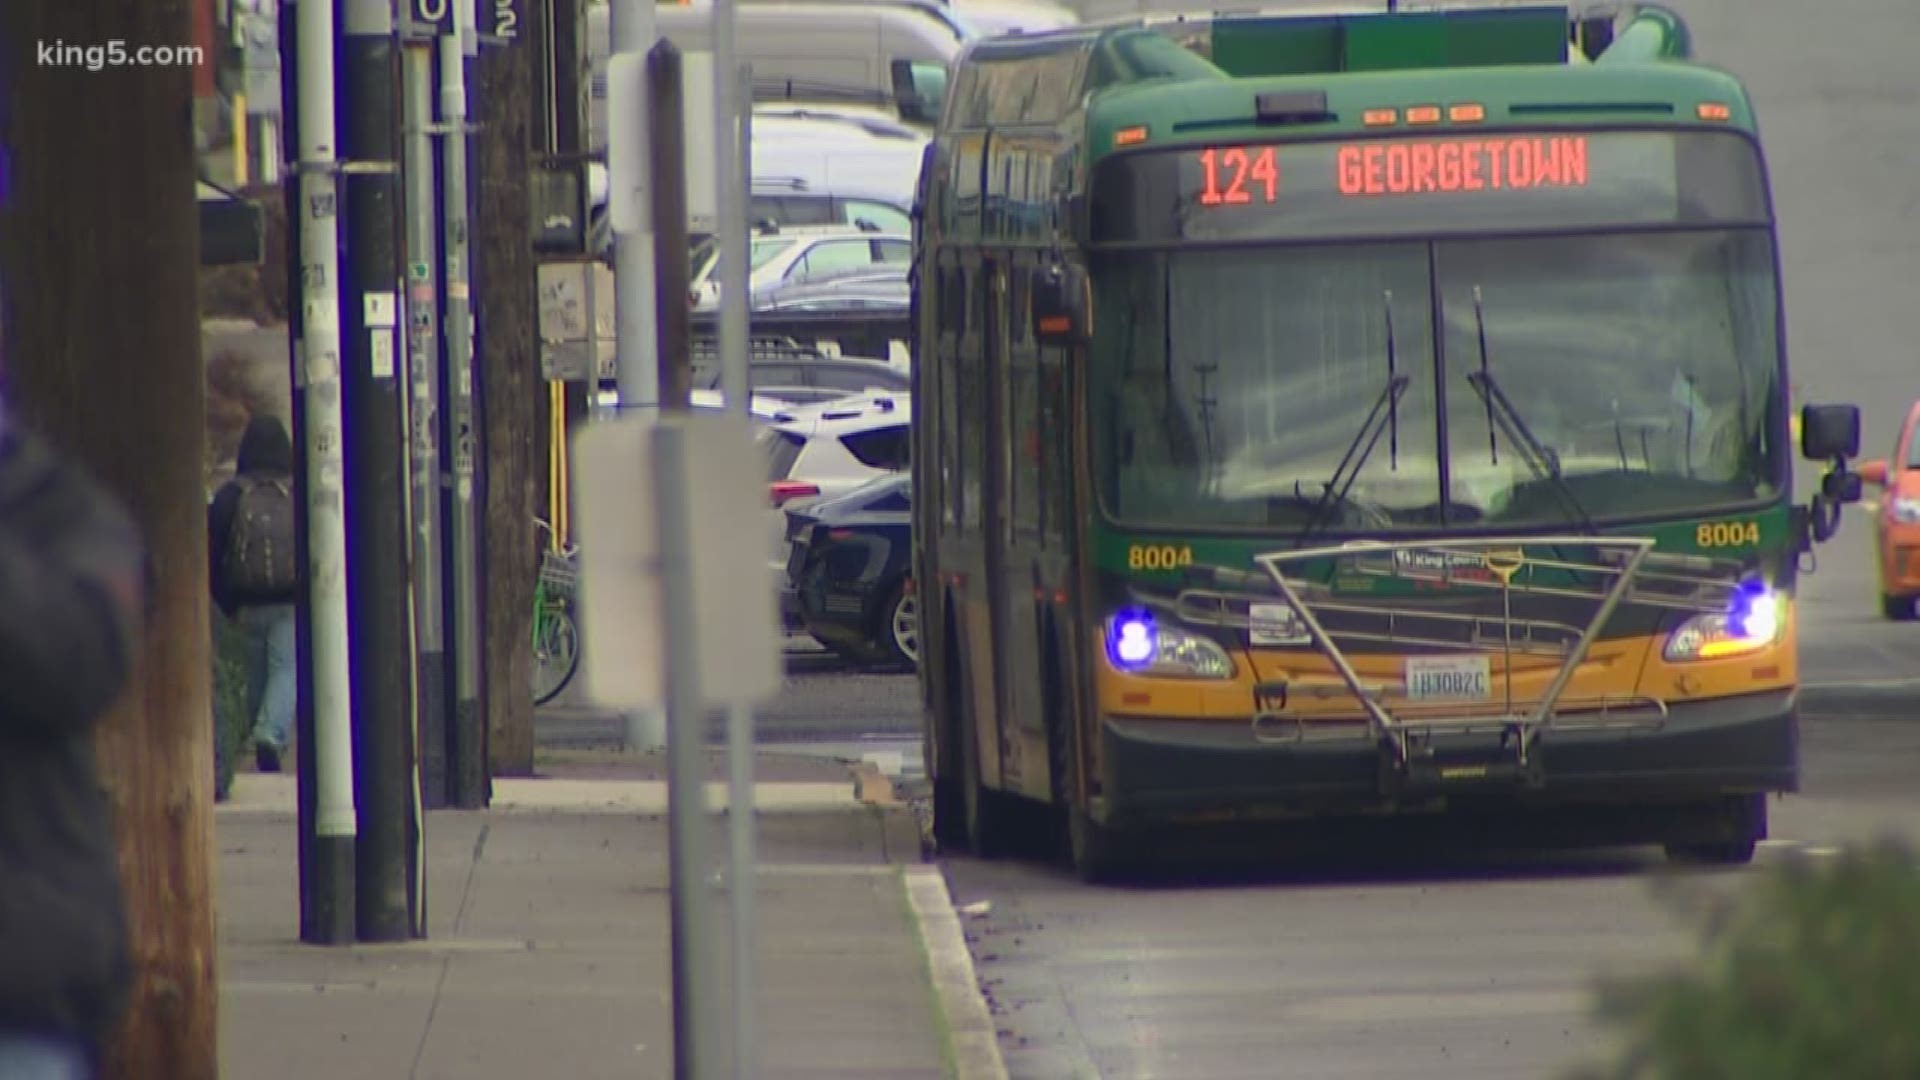 Through the closure, leaders are still asking people to take transit, and reduce trips. But drivers are noticing significant increases in their commute times. KING 5's Michael Crowe is asking how many people have tried transit, and are actually sticking with it.